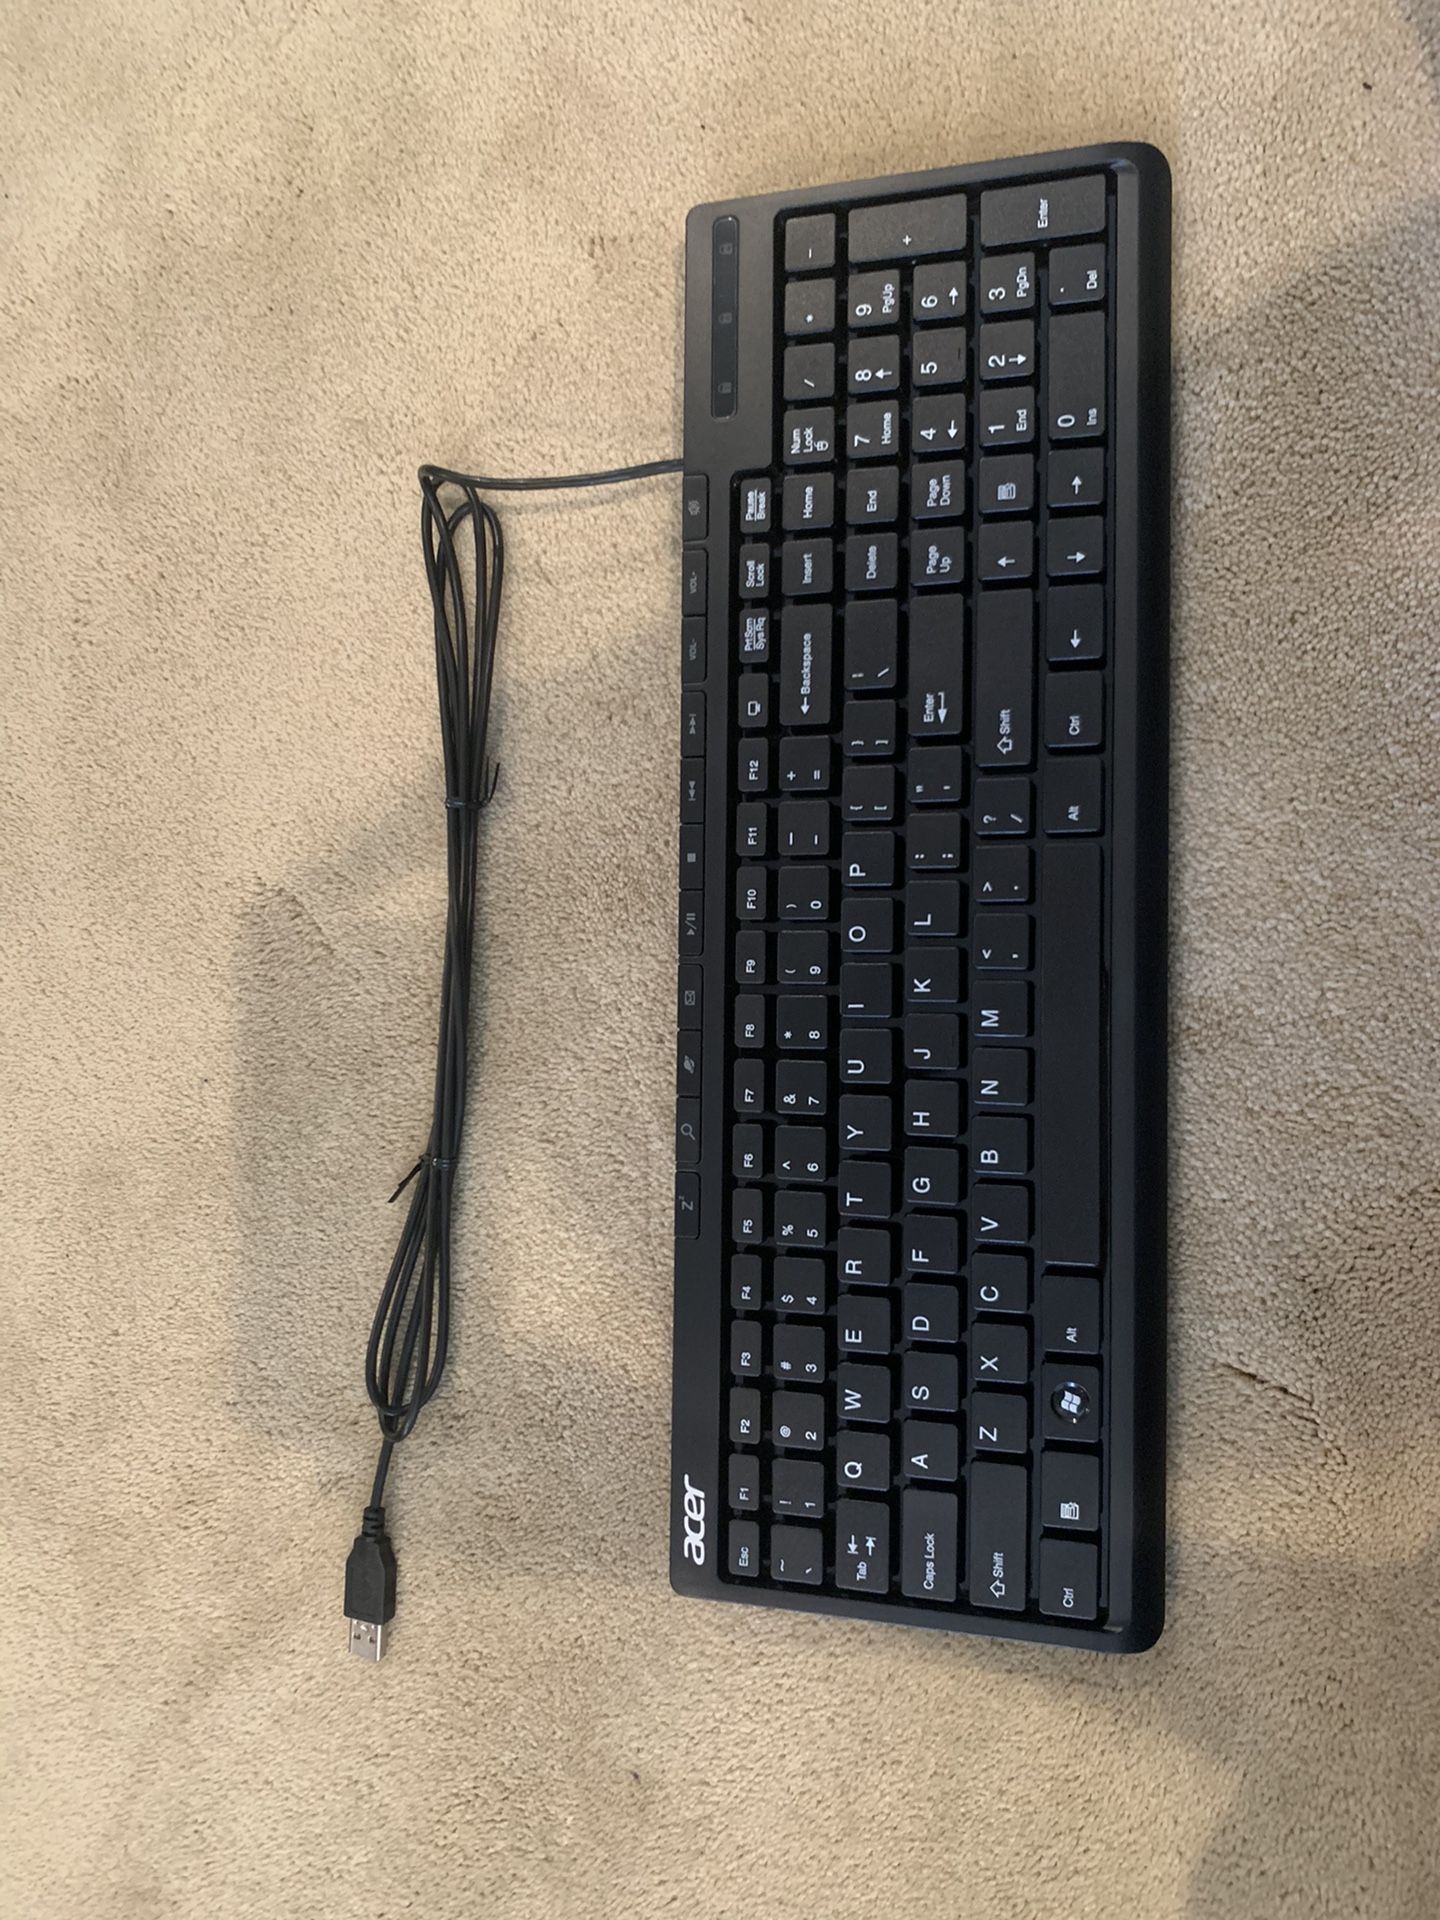 Brand new Acer computer keyboard